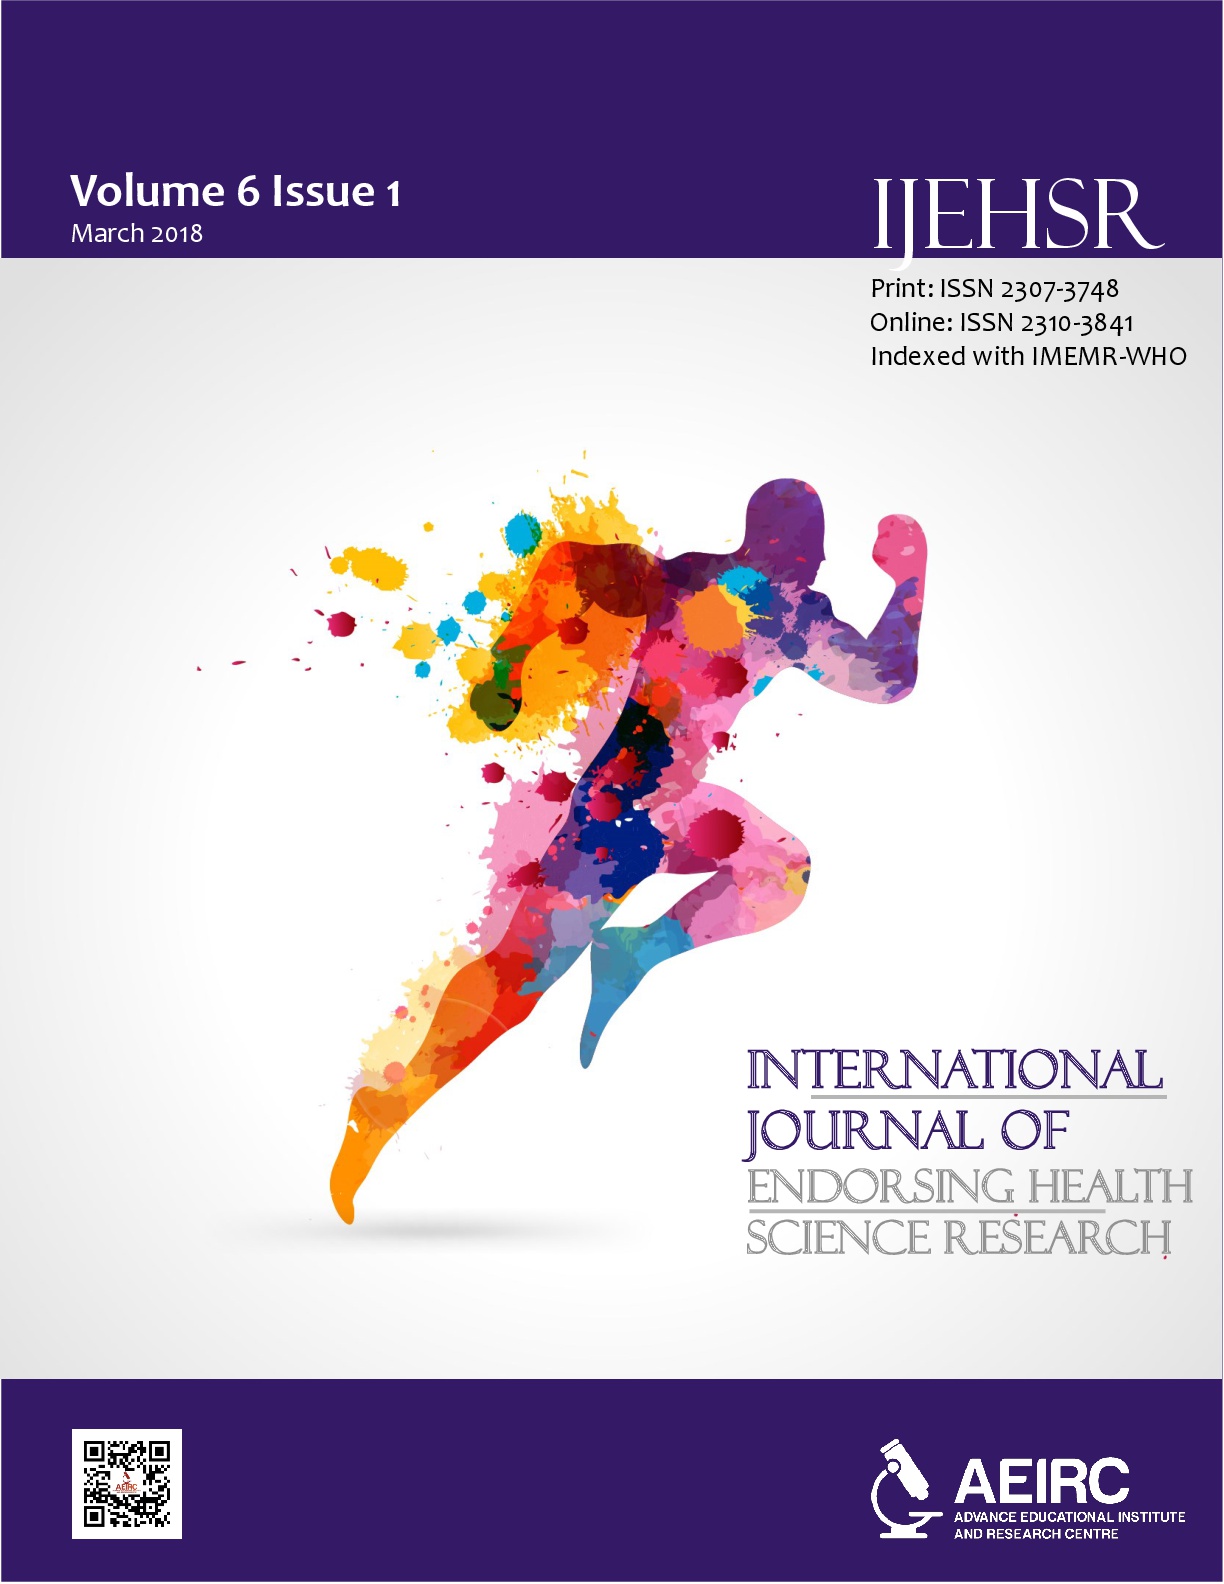 					View Vol. 6 No. 1 (2018): International Journal of Endorsing Health Science Research
				